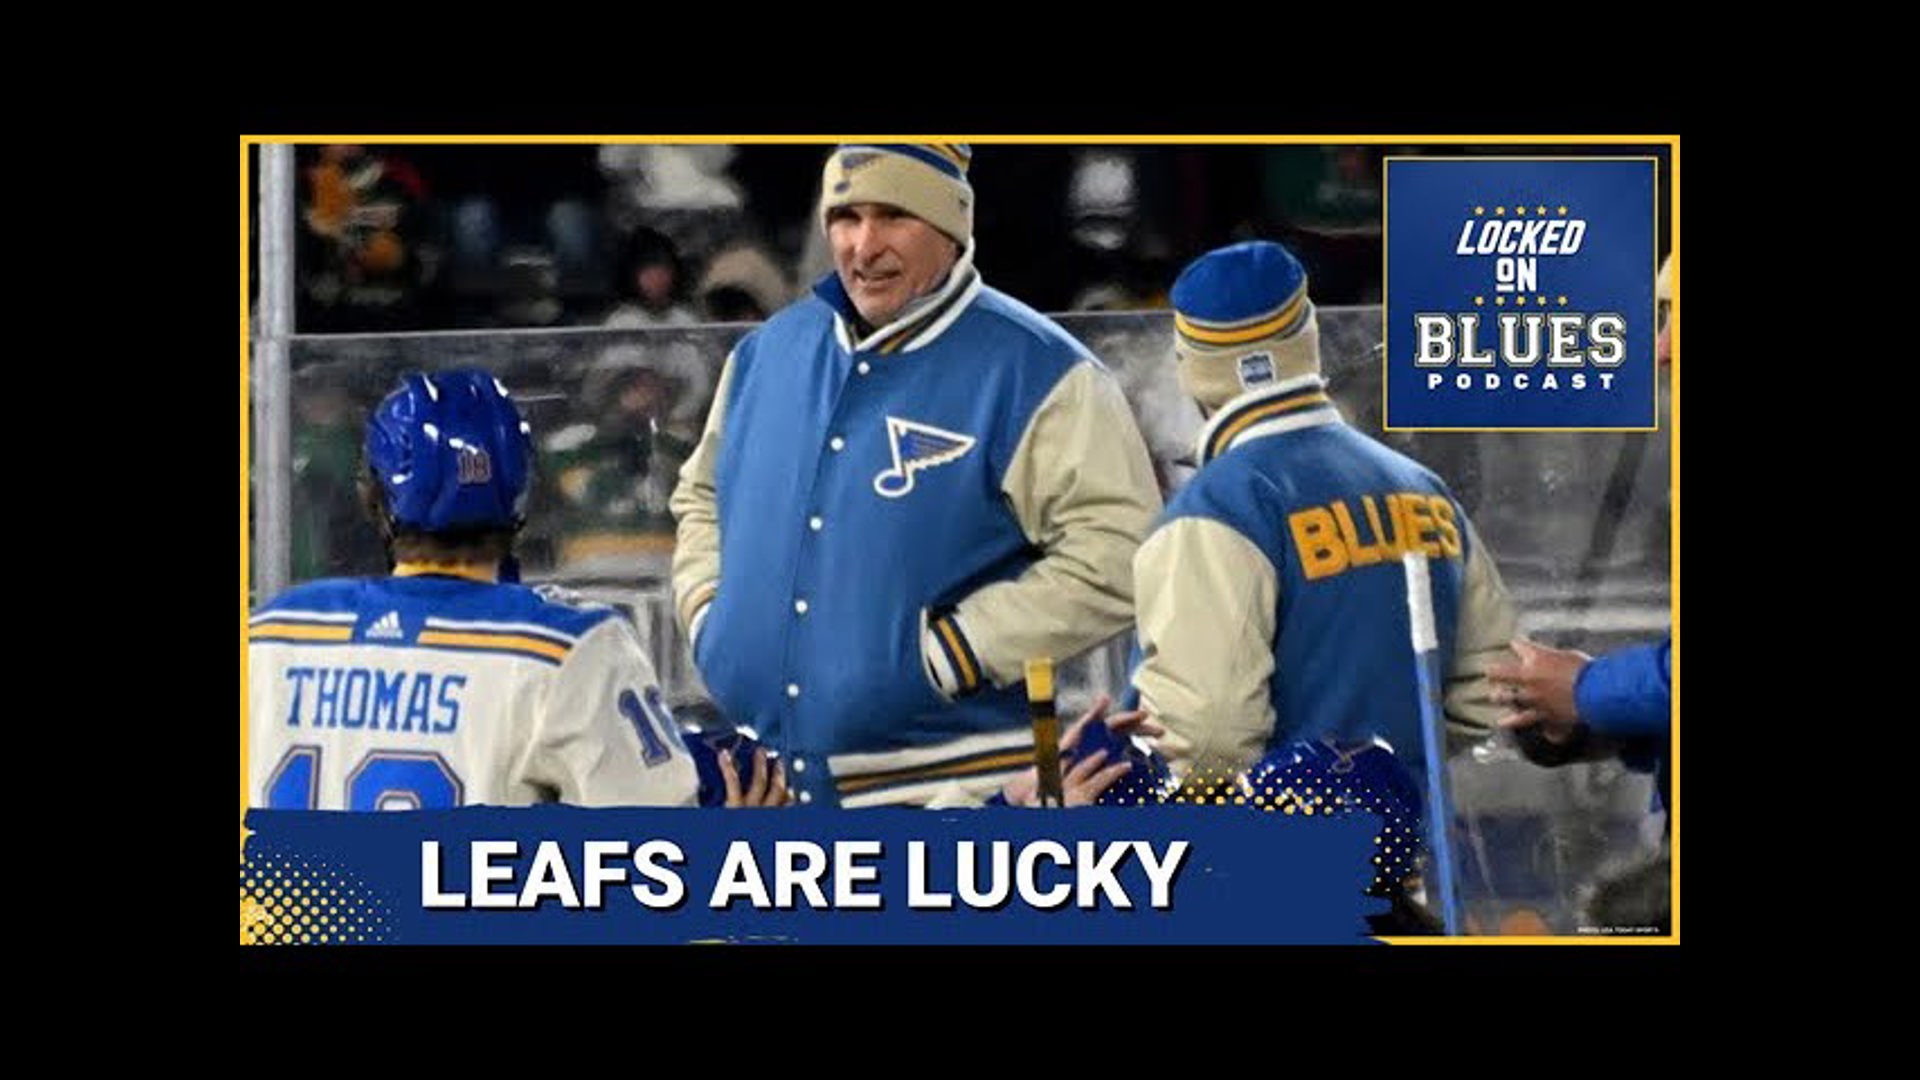 THE LEAFS ARE LUCKY TO HAVE CRAIG BERUBE